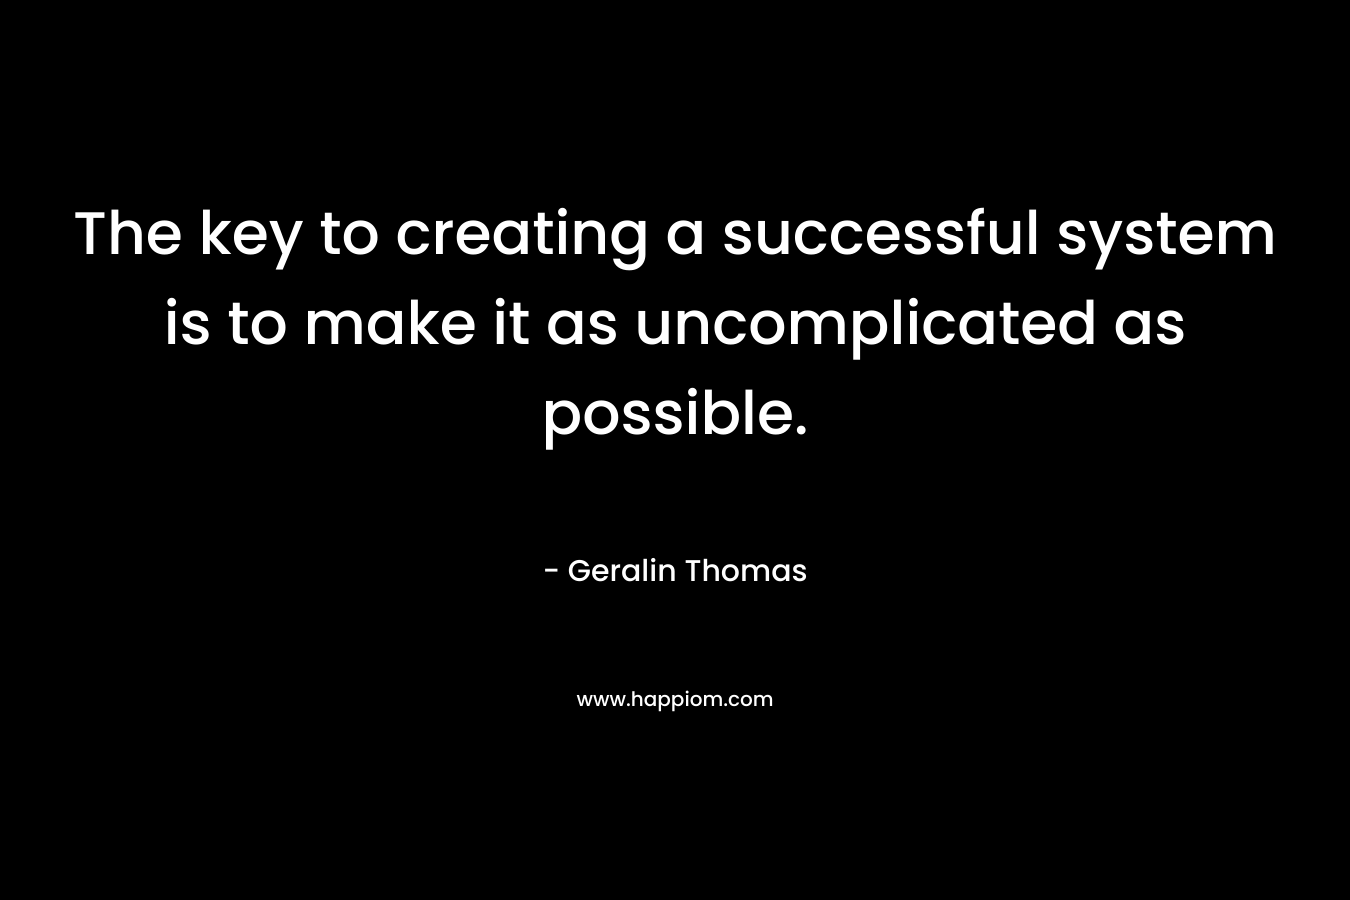 The key to creating a successful system is to make it as uncomplicated as possible. – Geralin Thomas